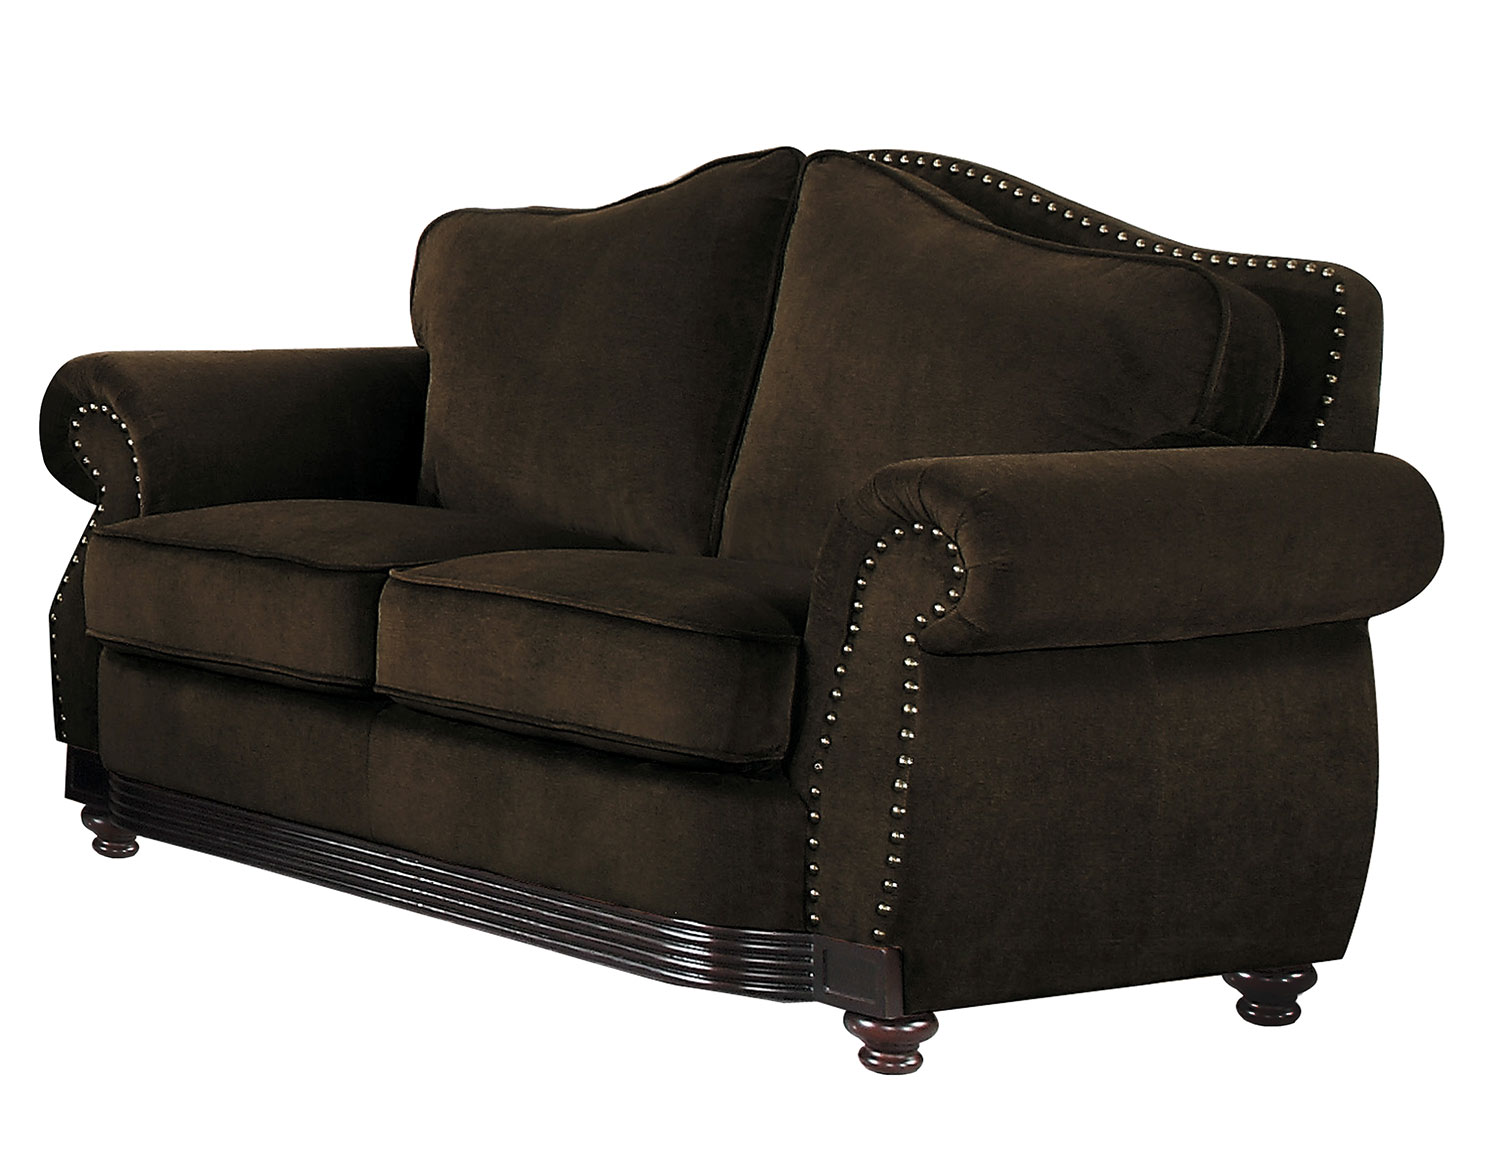 Homelegance Midwood Love Seat - Chocolate Chenille